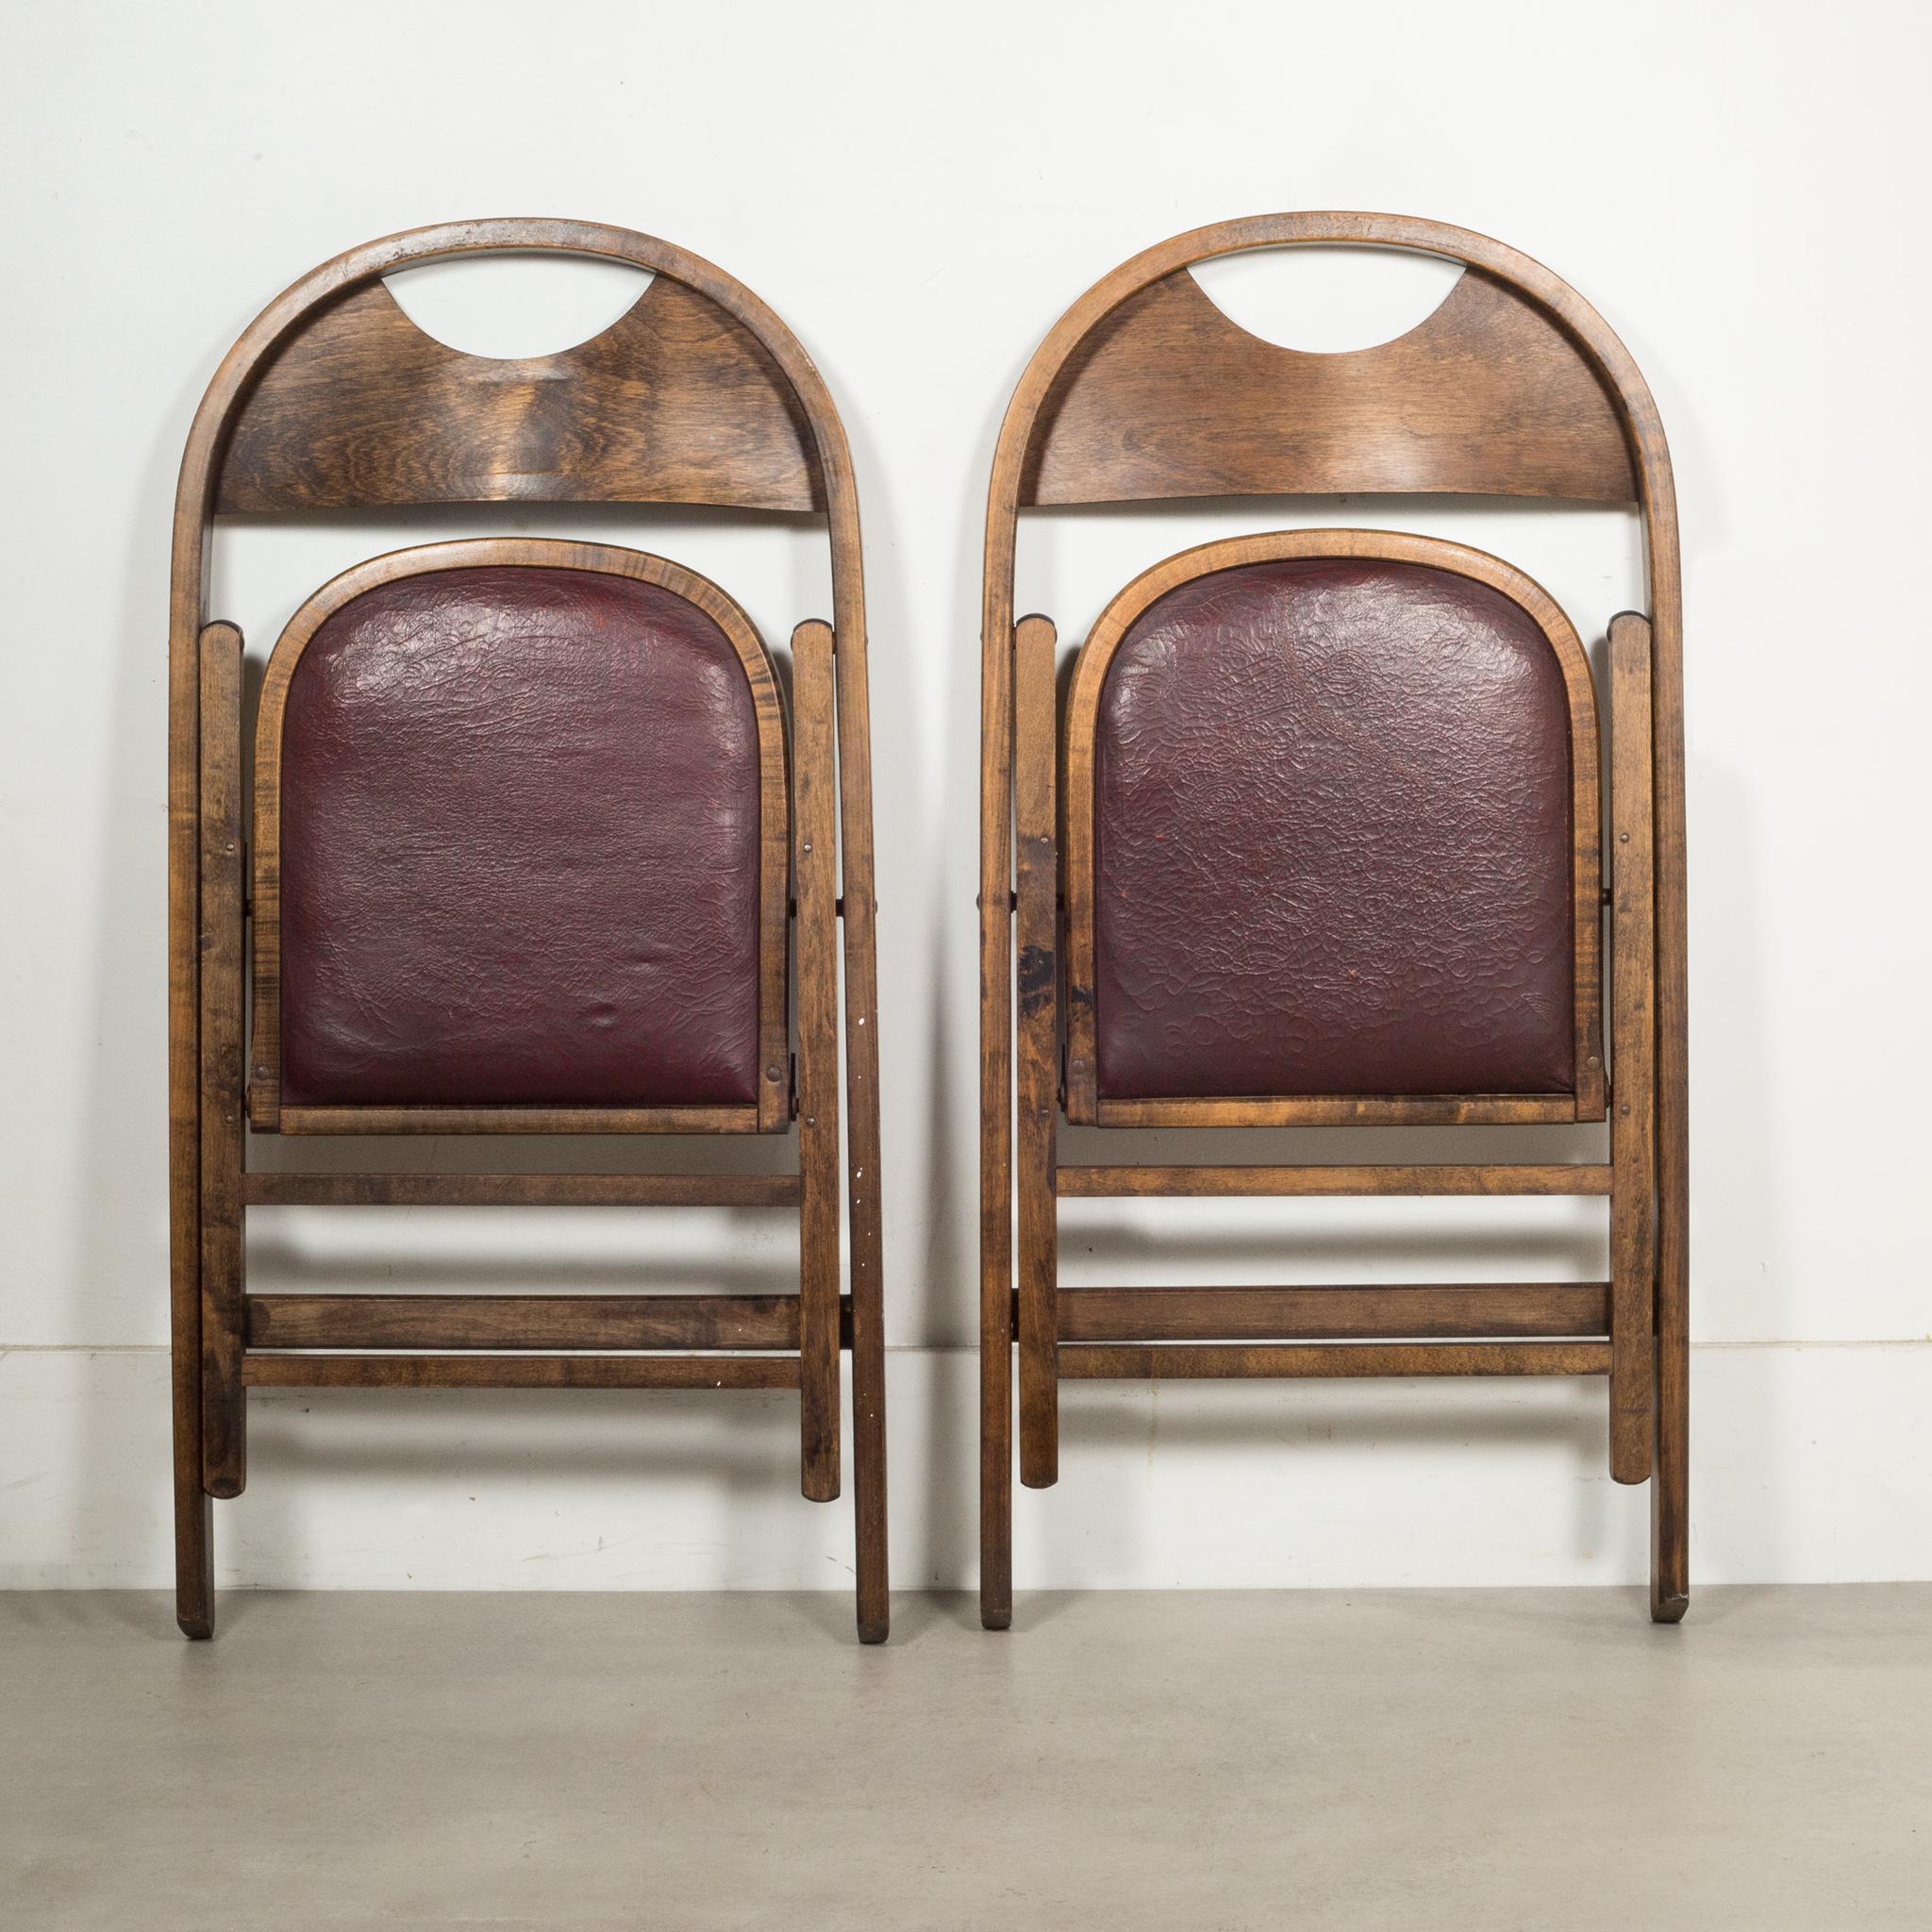 American Late 19th C./Early 20th C. Antique Acme Folding Chairs C.1890-1910